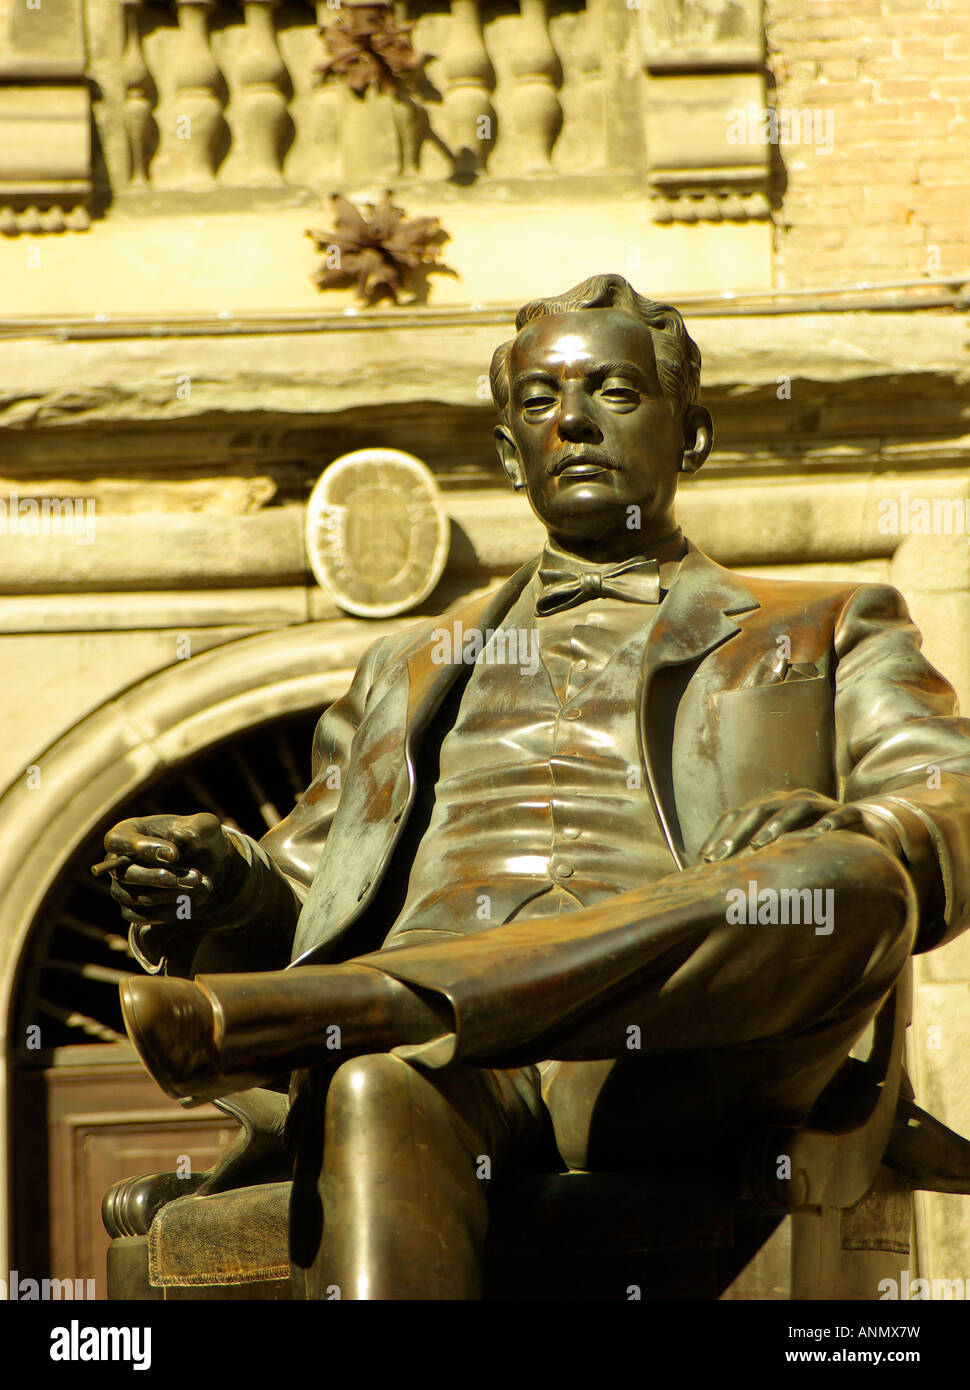 Statue of composer Giacomo Puccini by sculptor Cito Tongiani outside the house and museum of Puccini in Lucca Tuscany Italy Stock Photo